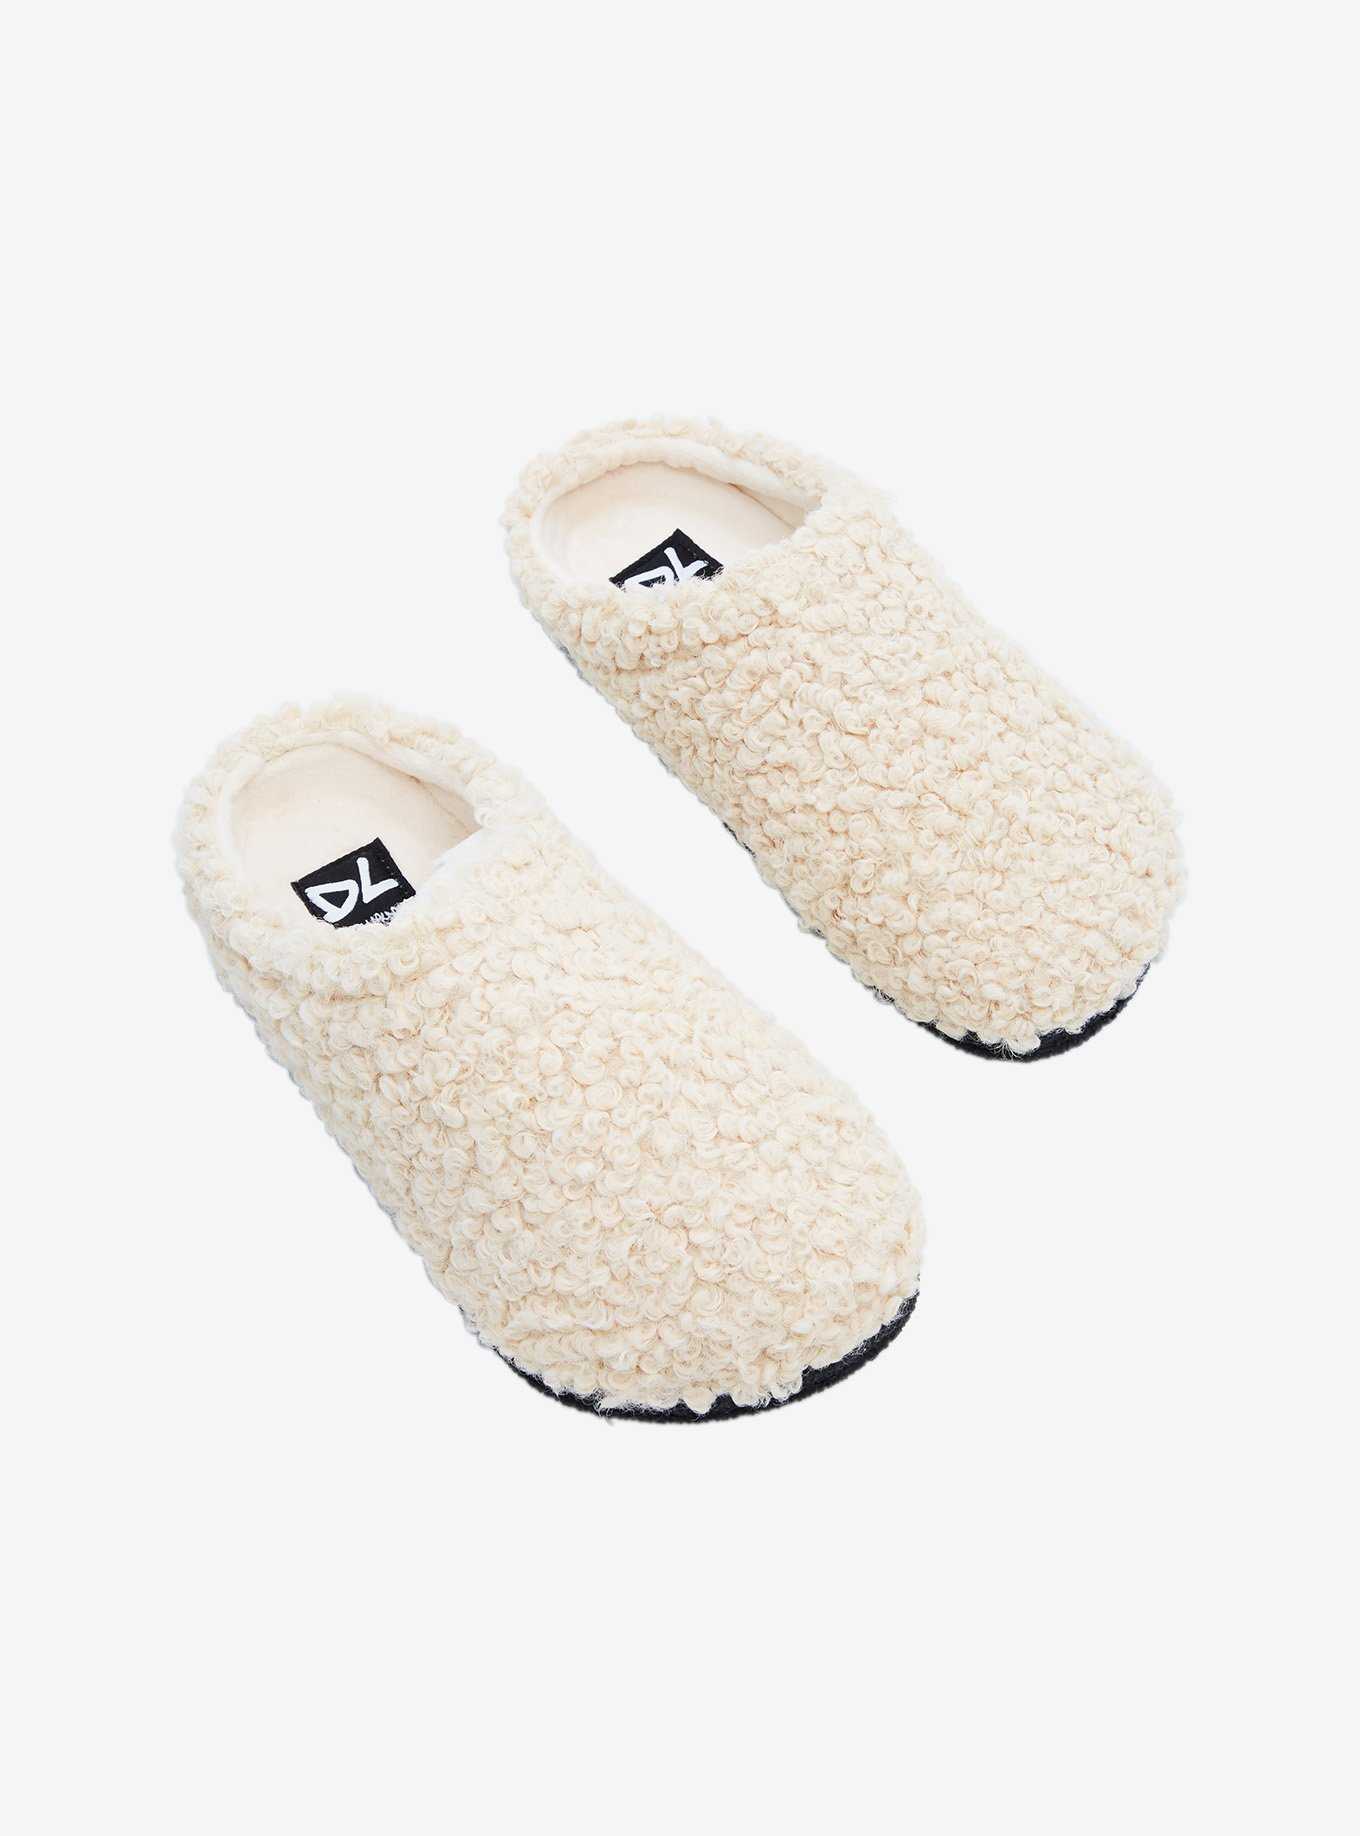 Dirty Laundry Ivory Sherpa Slippers, , hi-res